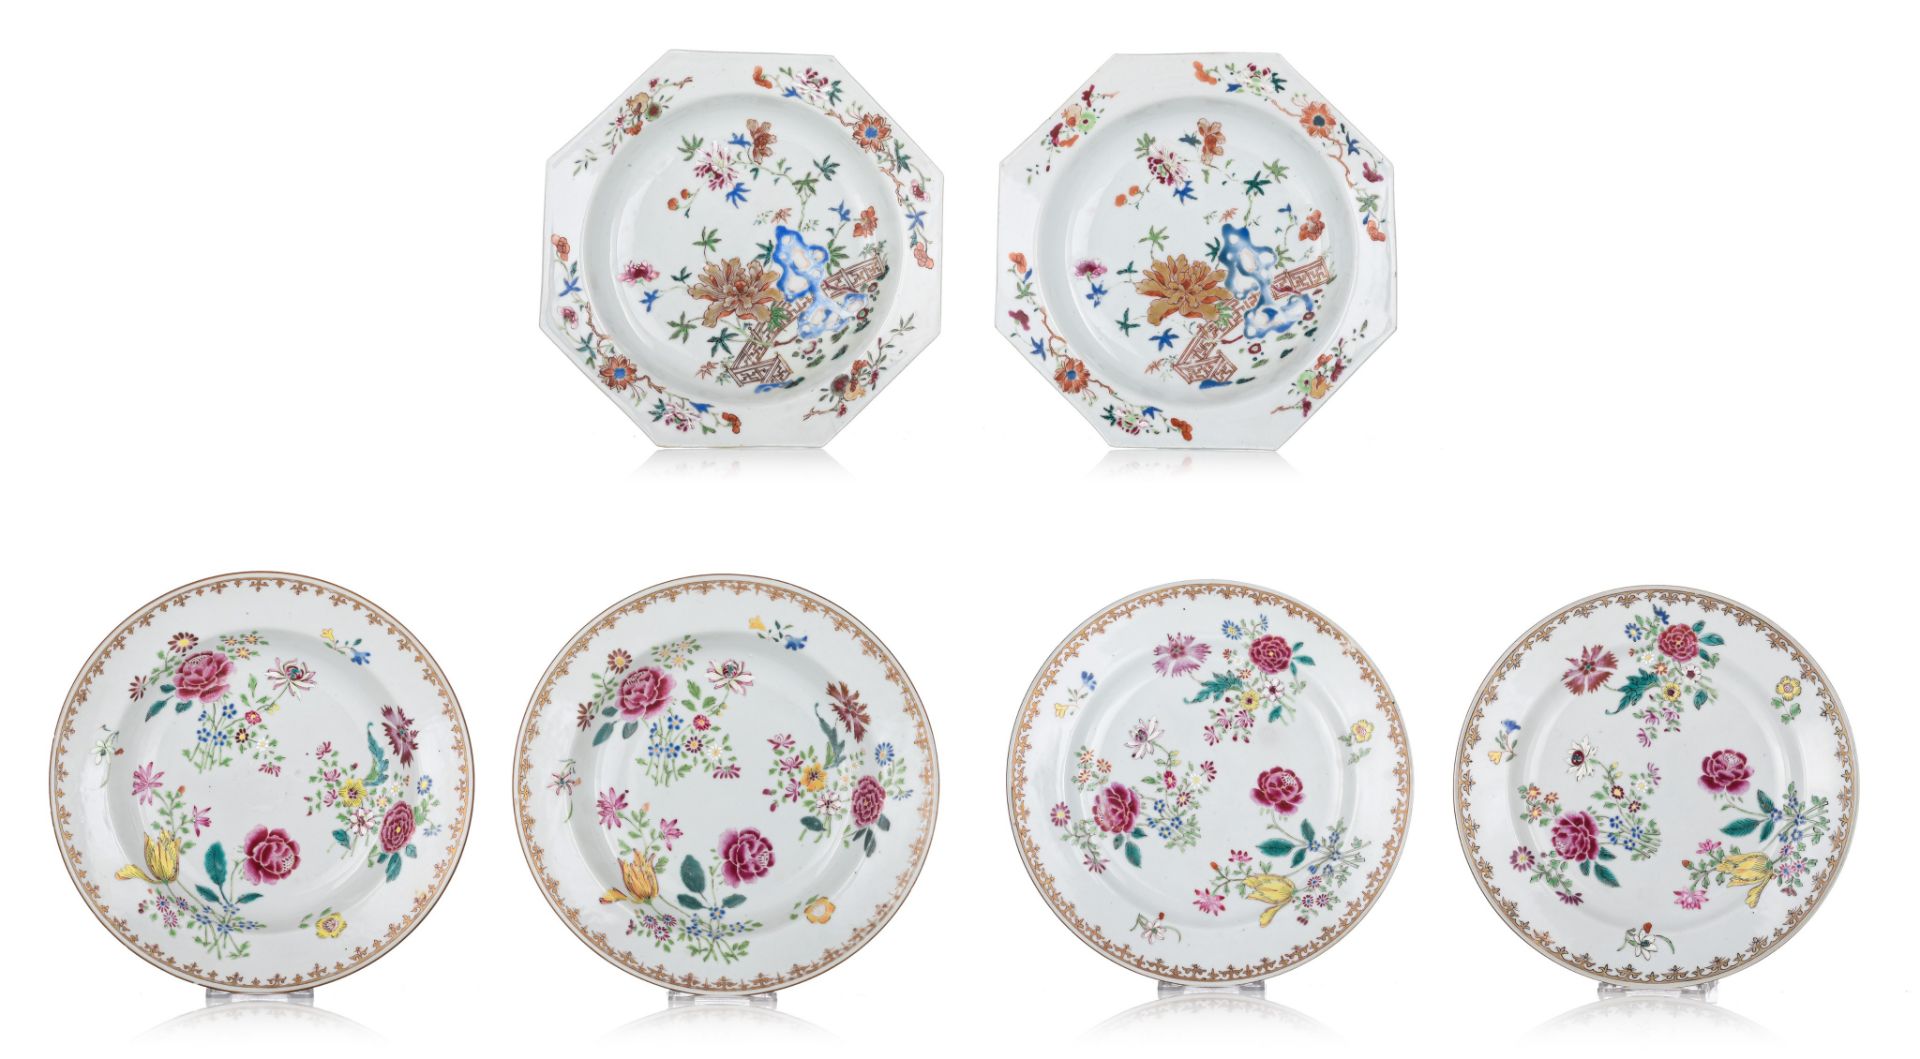 A collection of six Chinese famille rose export porcelain plates, 18thC, ¯ 23,5 cm